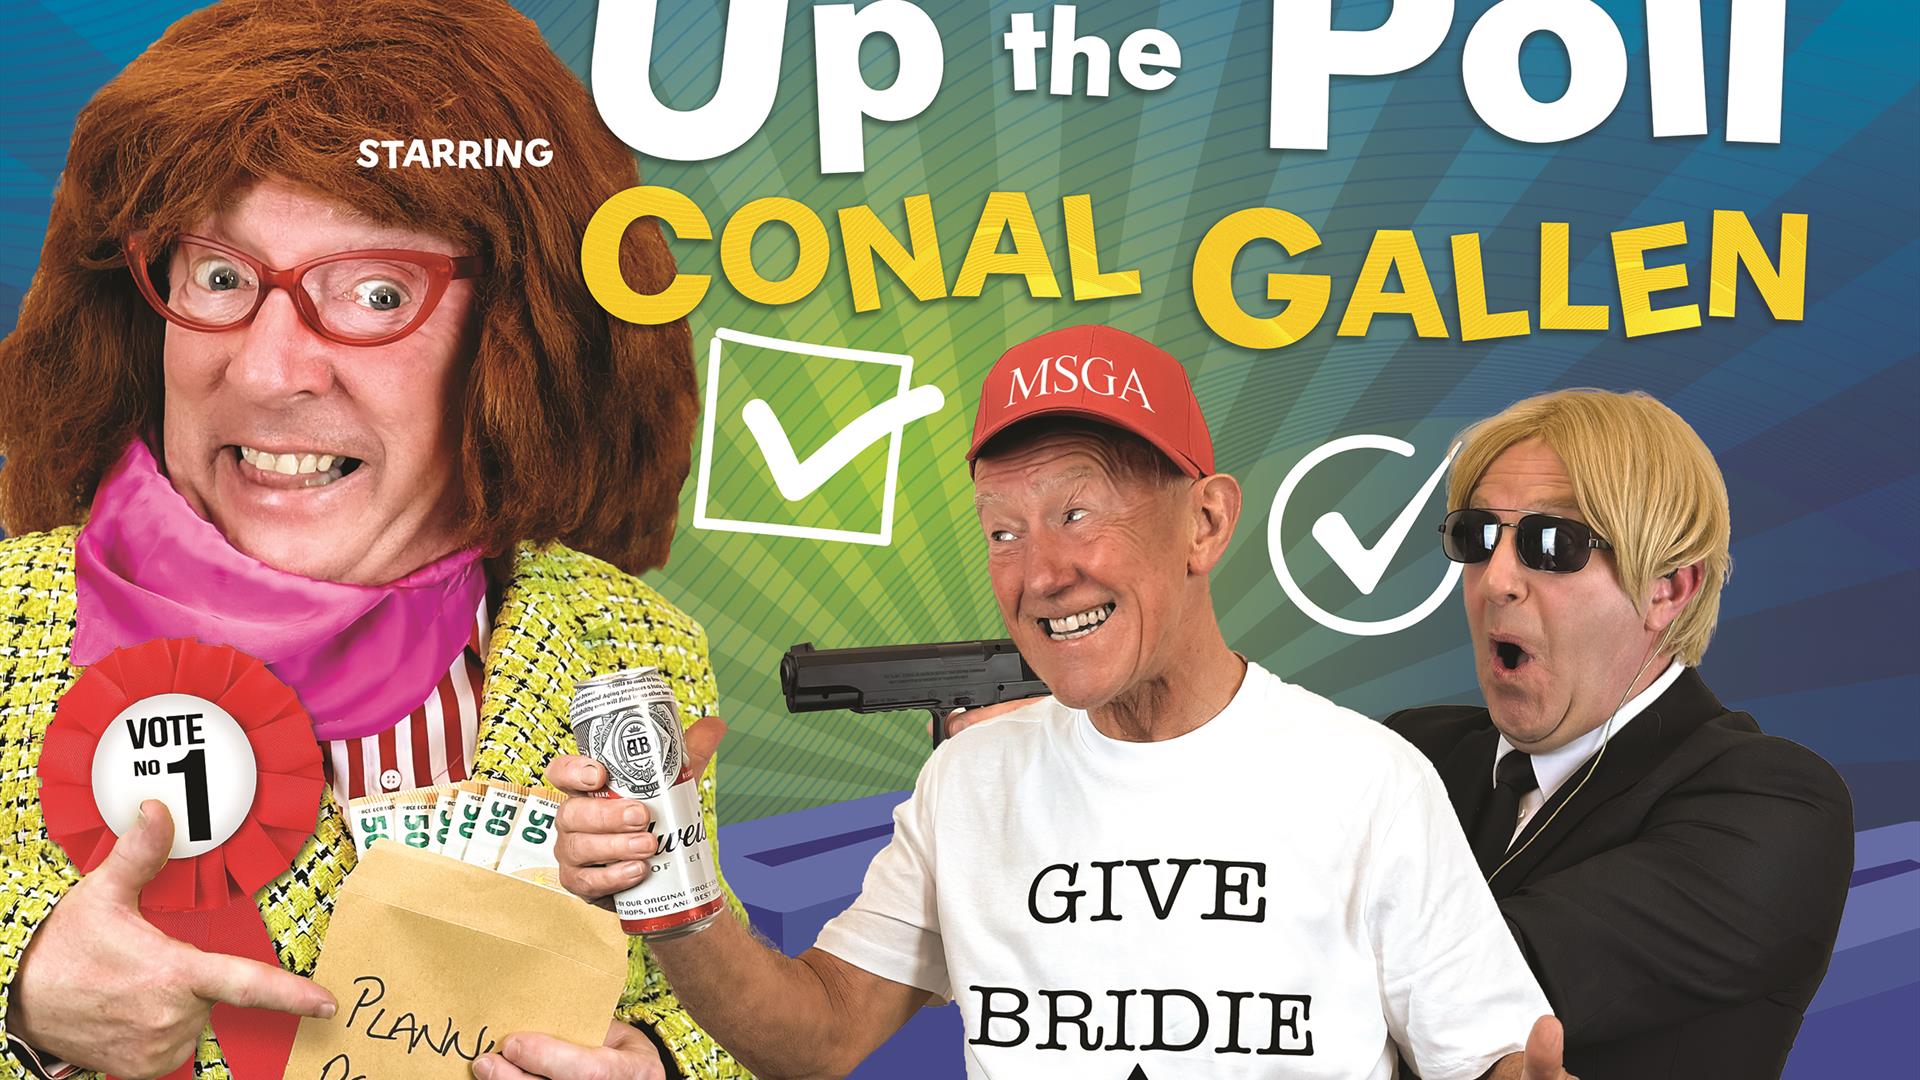 Three images of Conal Gallen wearing a wig, a hat and sunglasses